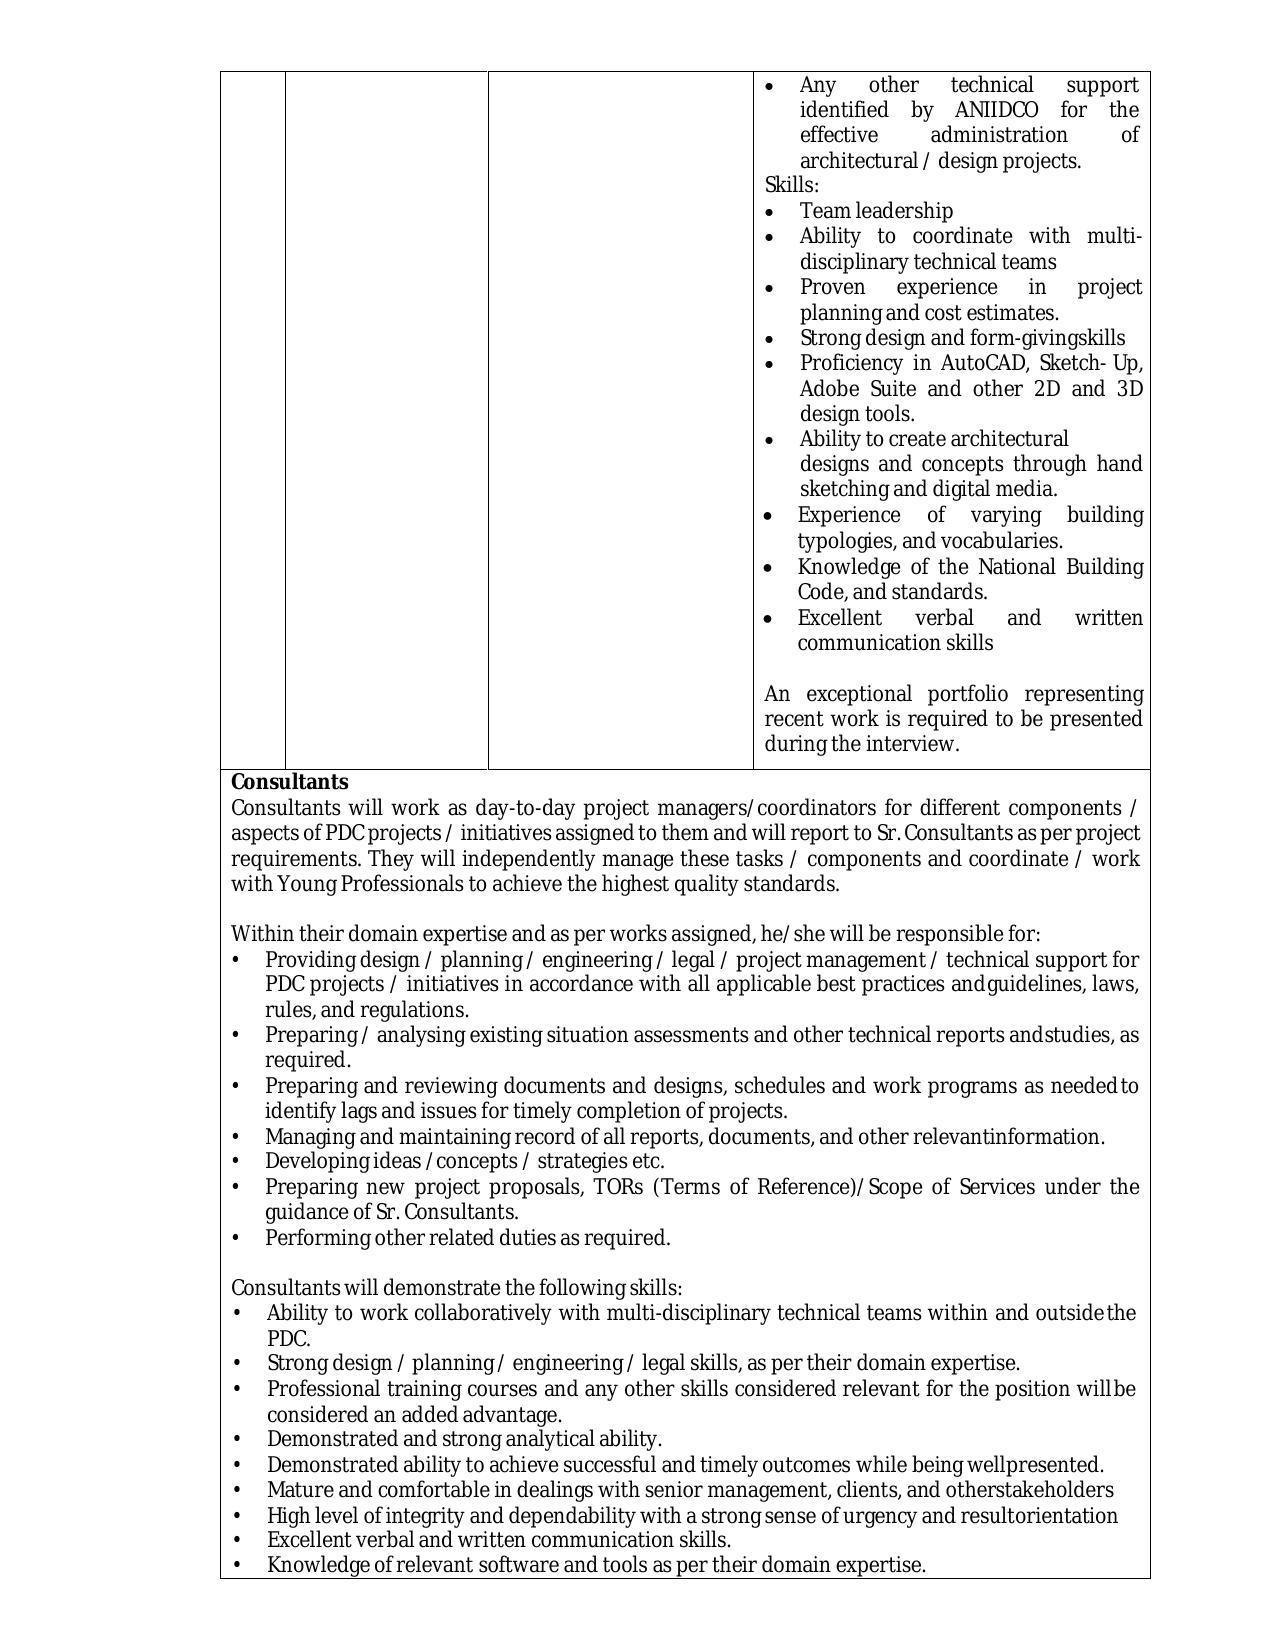 ANIIDCO Invites Application for 18 Environmental Planner, More Vacancies Recruitment 2022 - Page 11